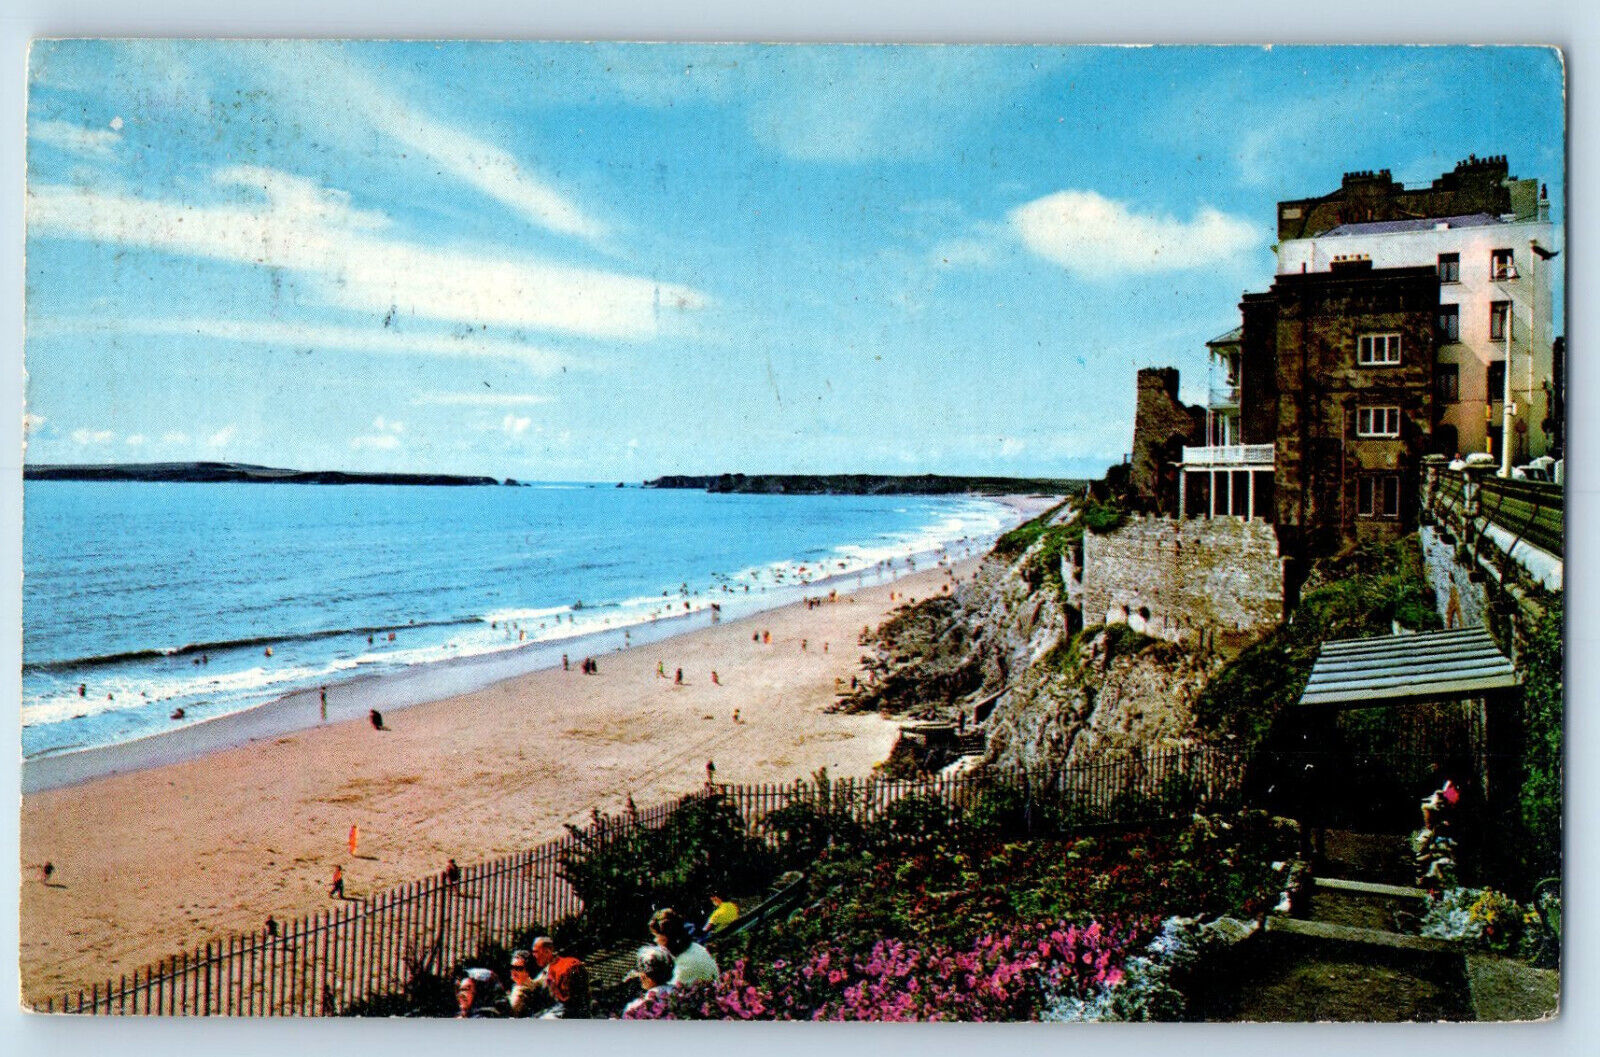 Tenby Pembrokeshire Wales Postcard Caldey Island from South Beach c1950's